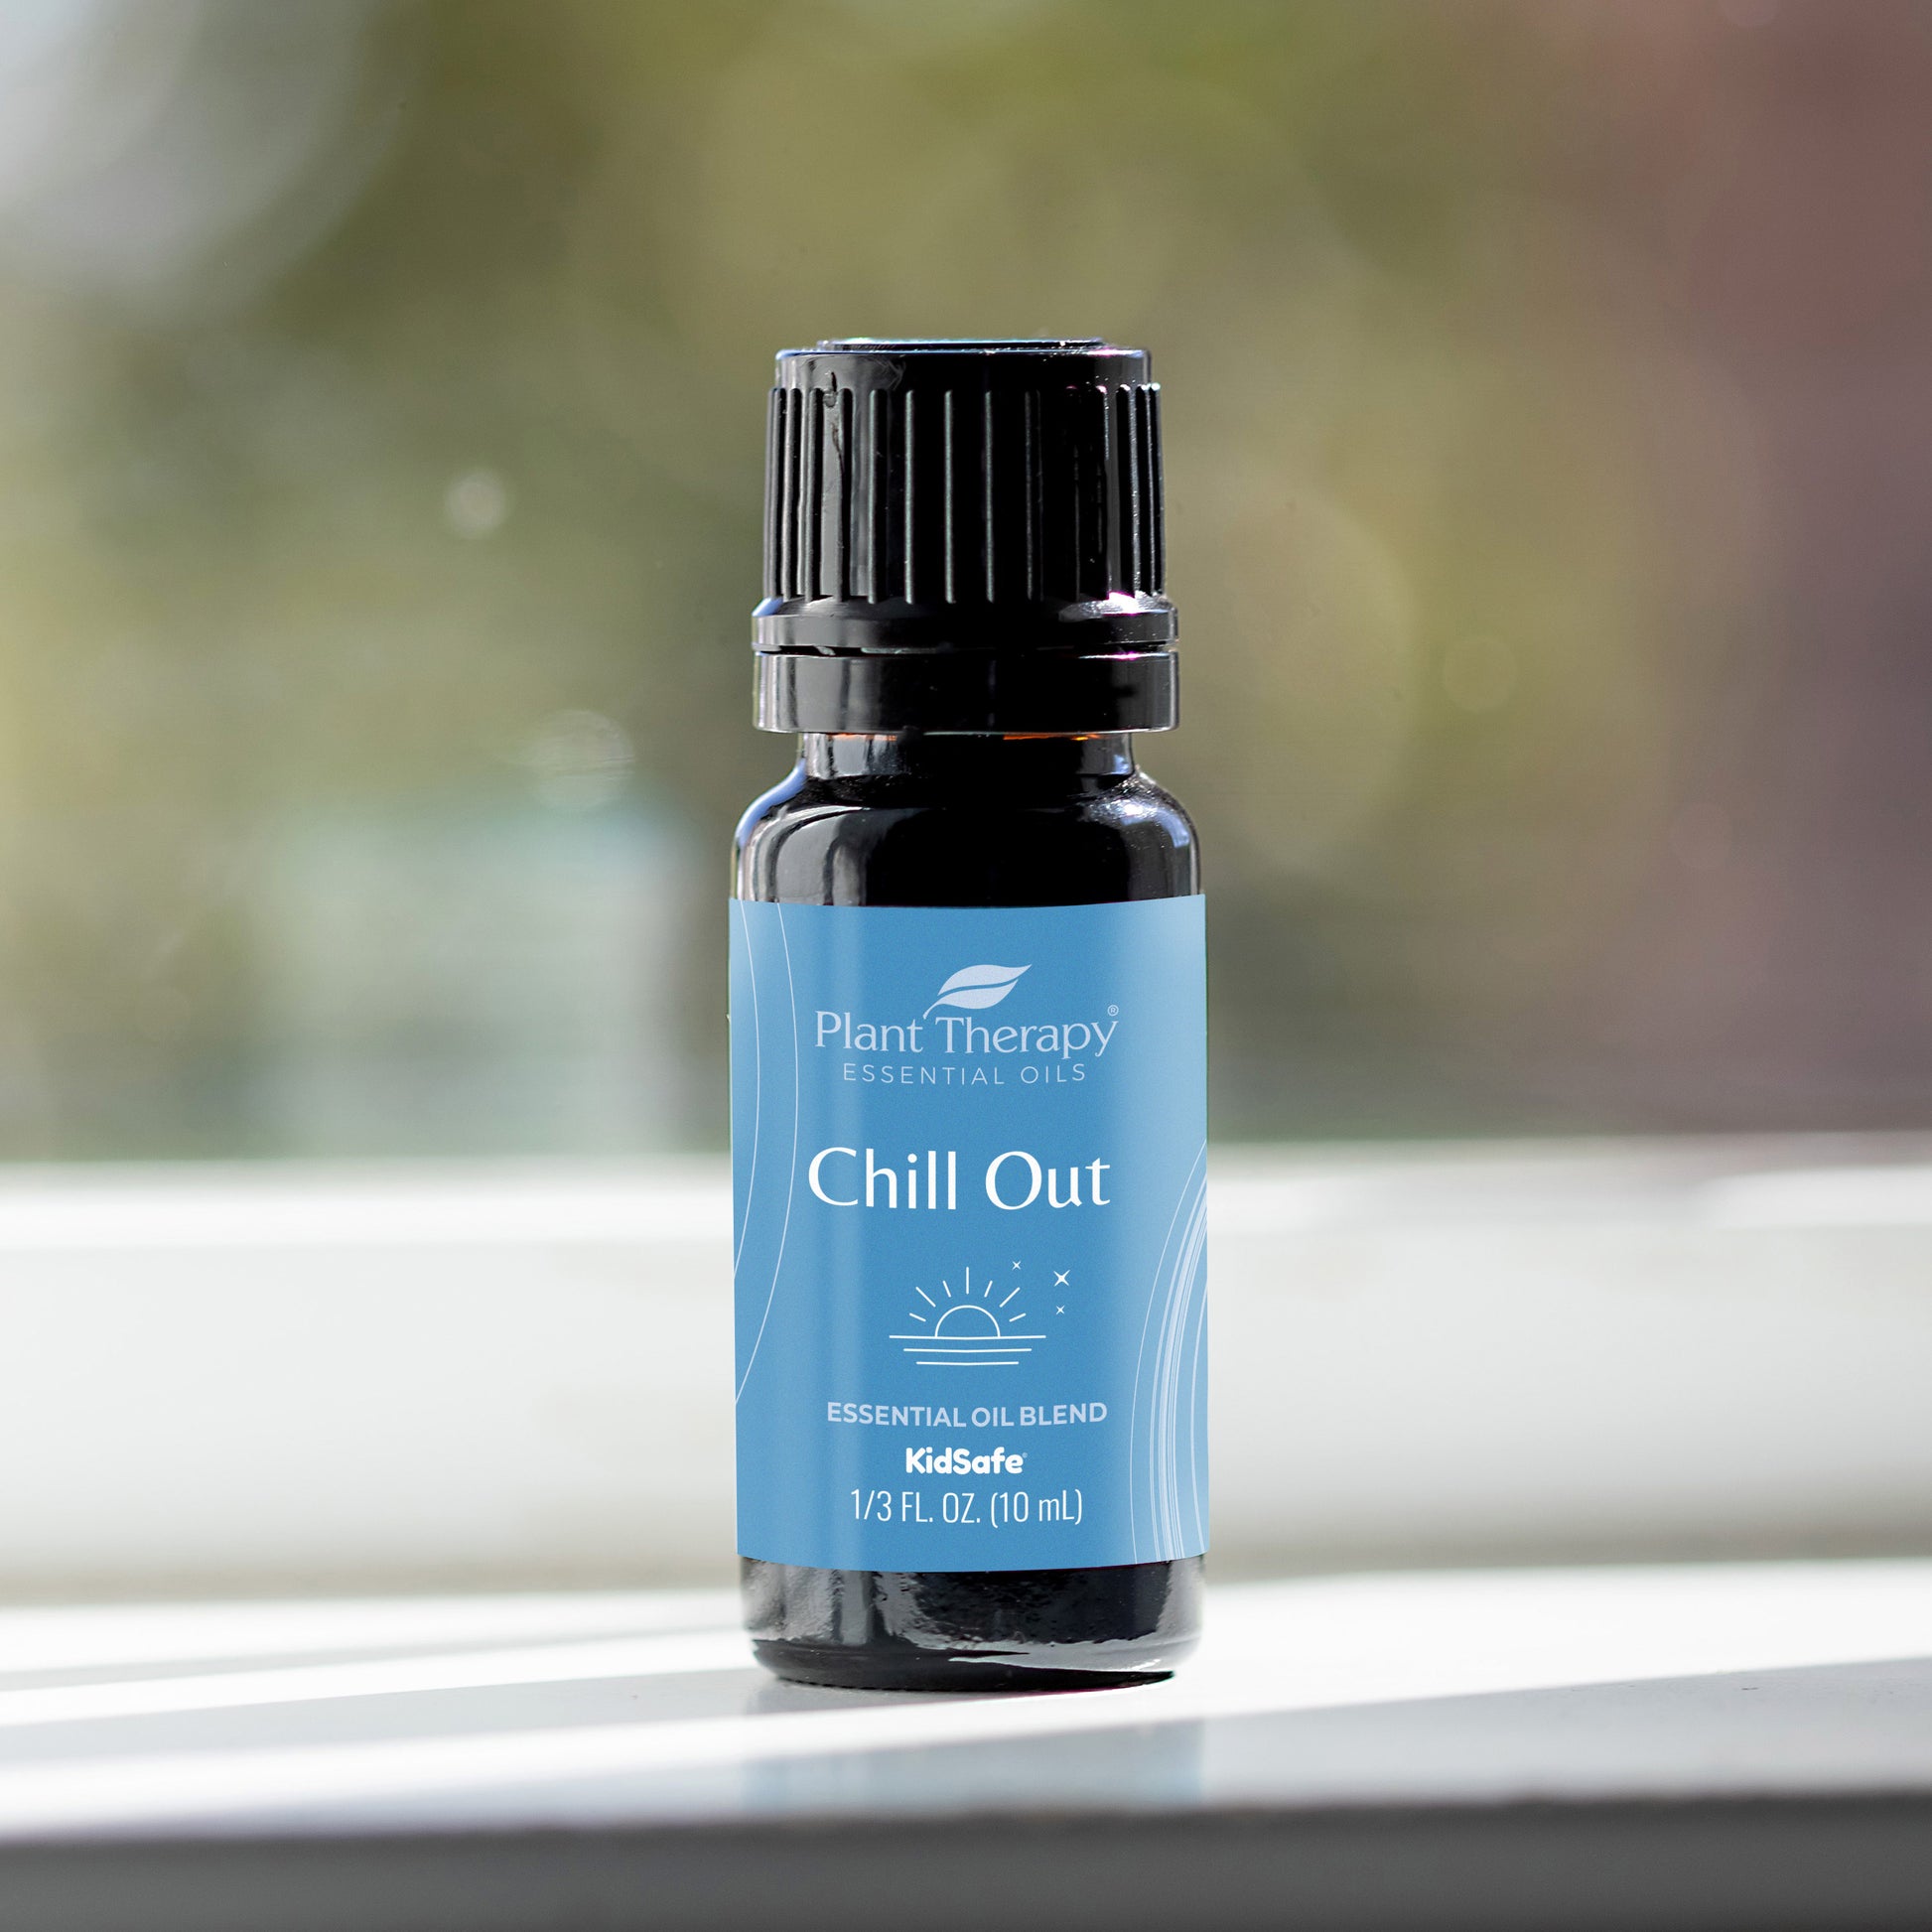 Male Harmony Blend  Chill & Mellow Out Essential Oils - Essential 3